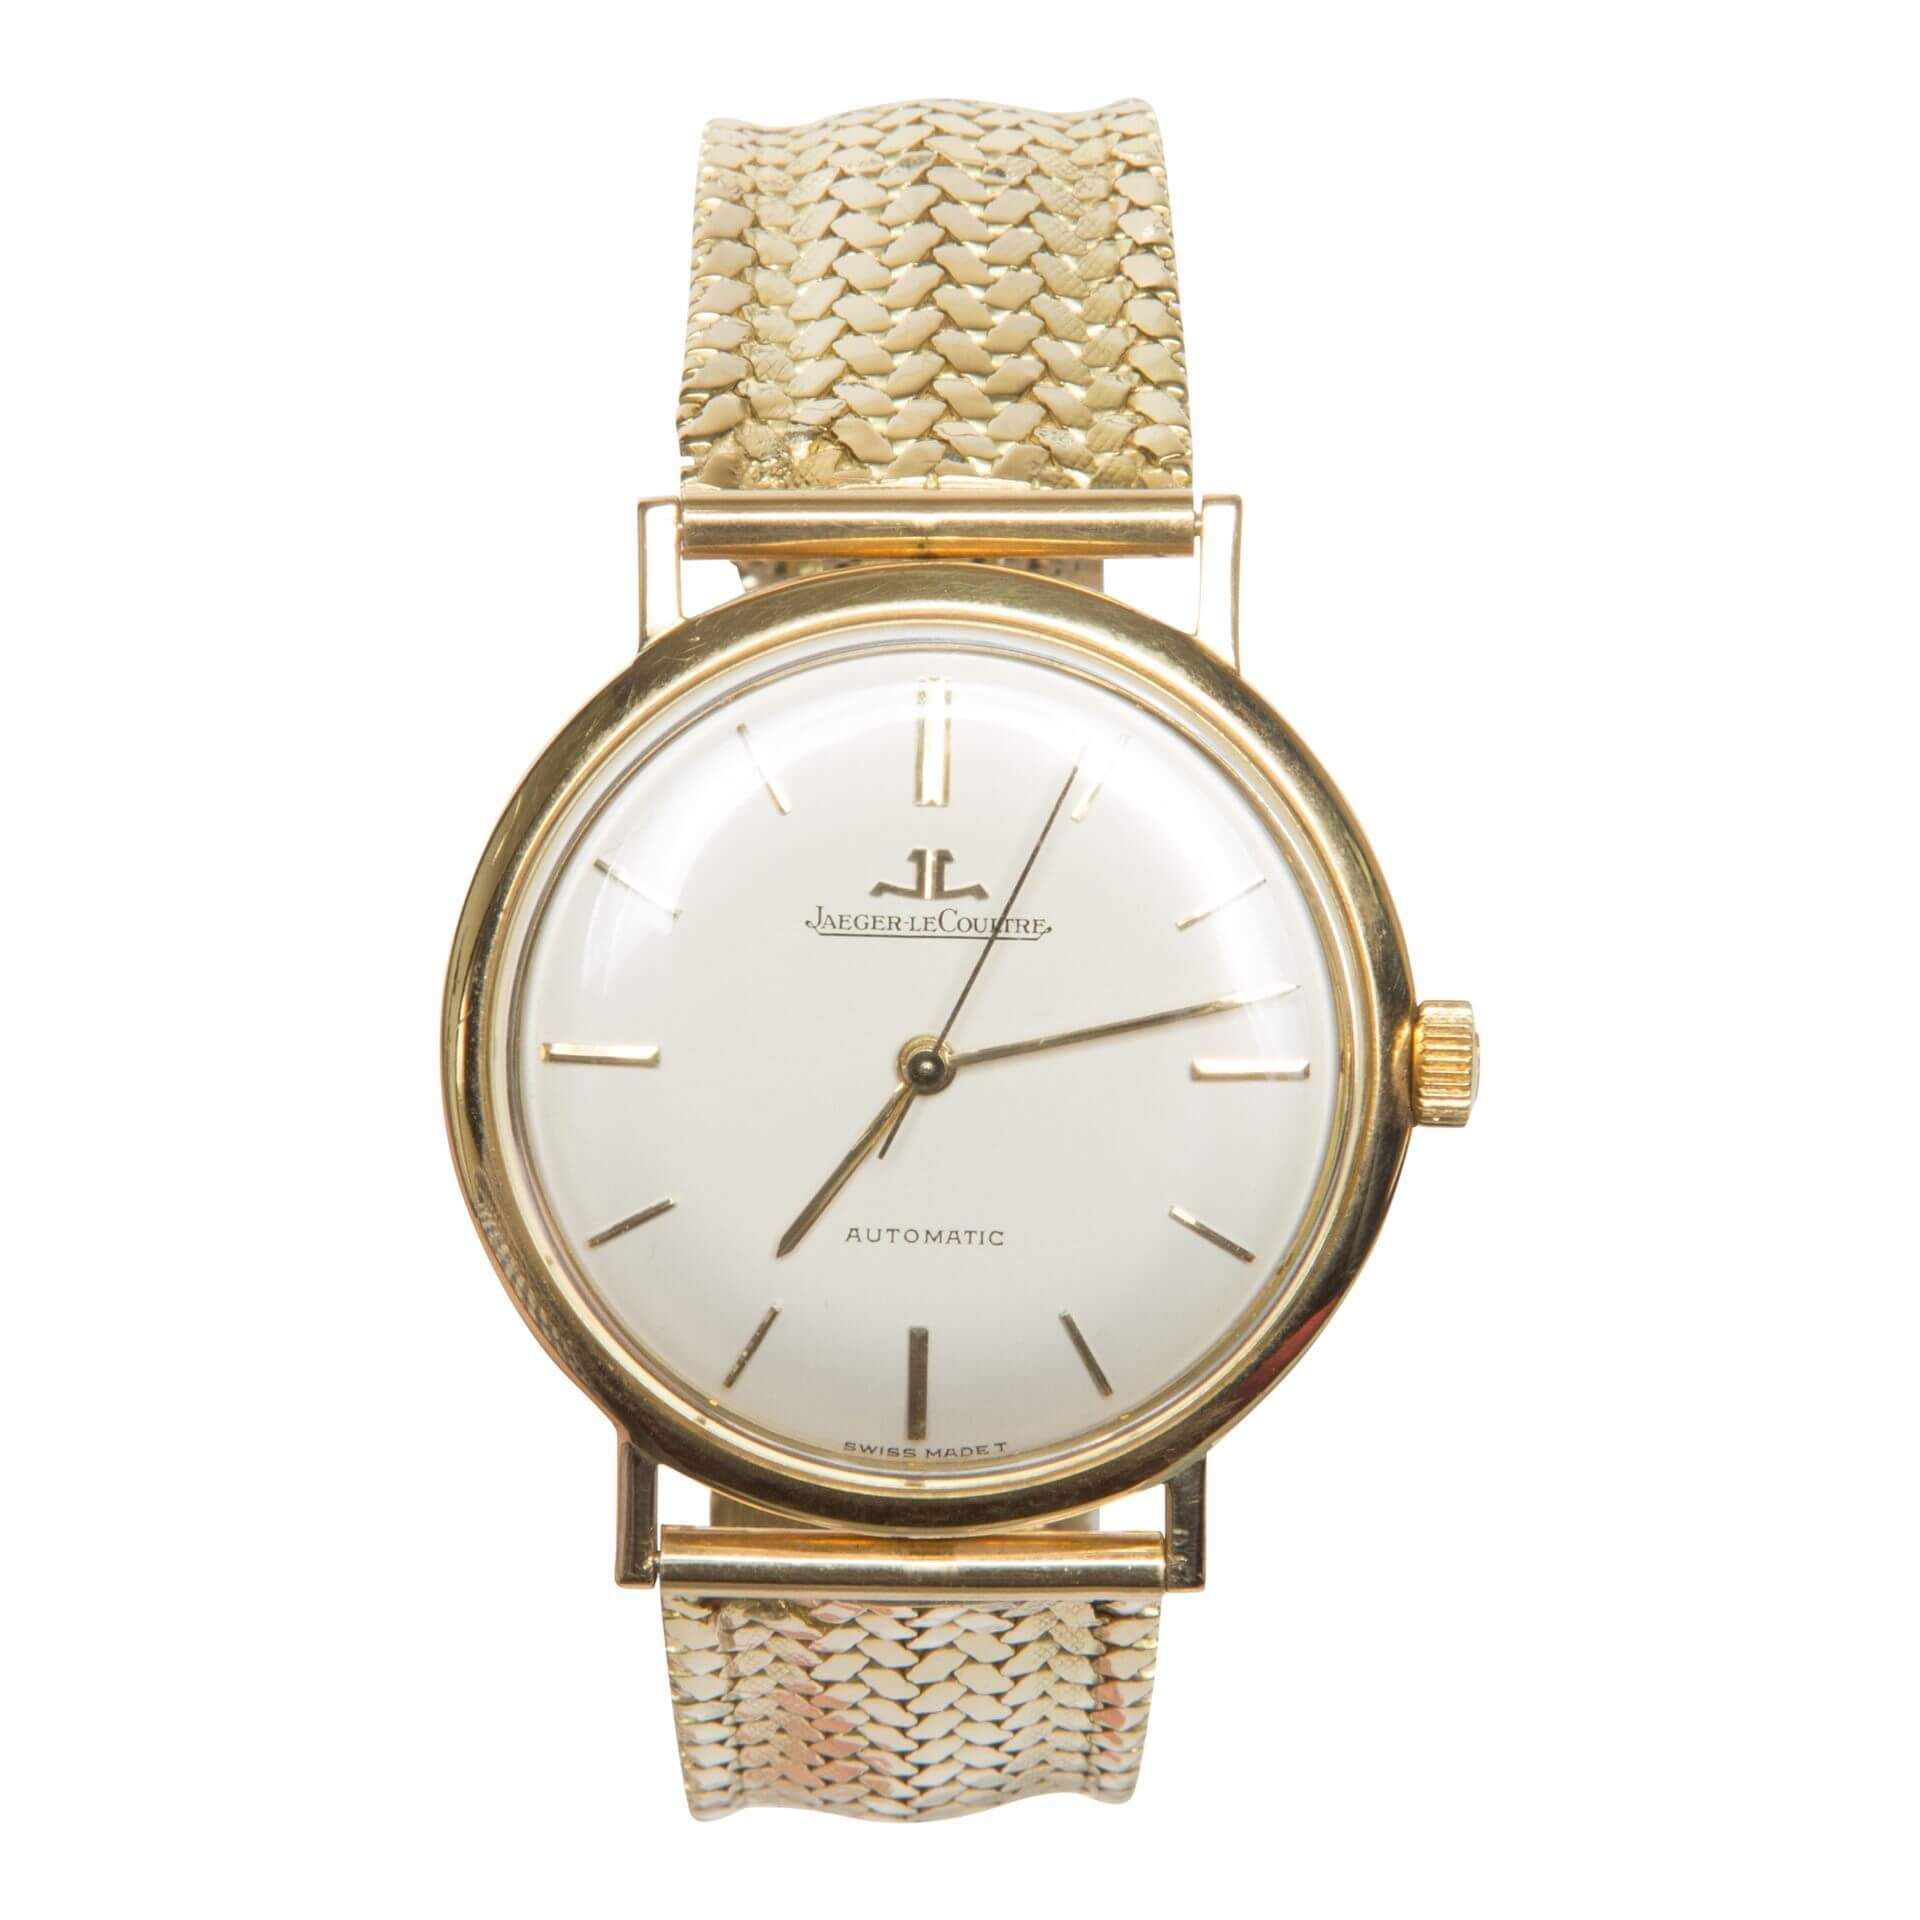 1960s Jaeger-LeCoultre 18 Carat Gold, Automatic Watch